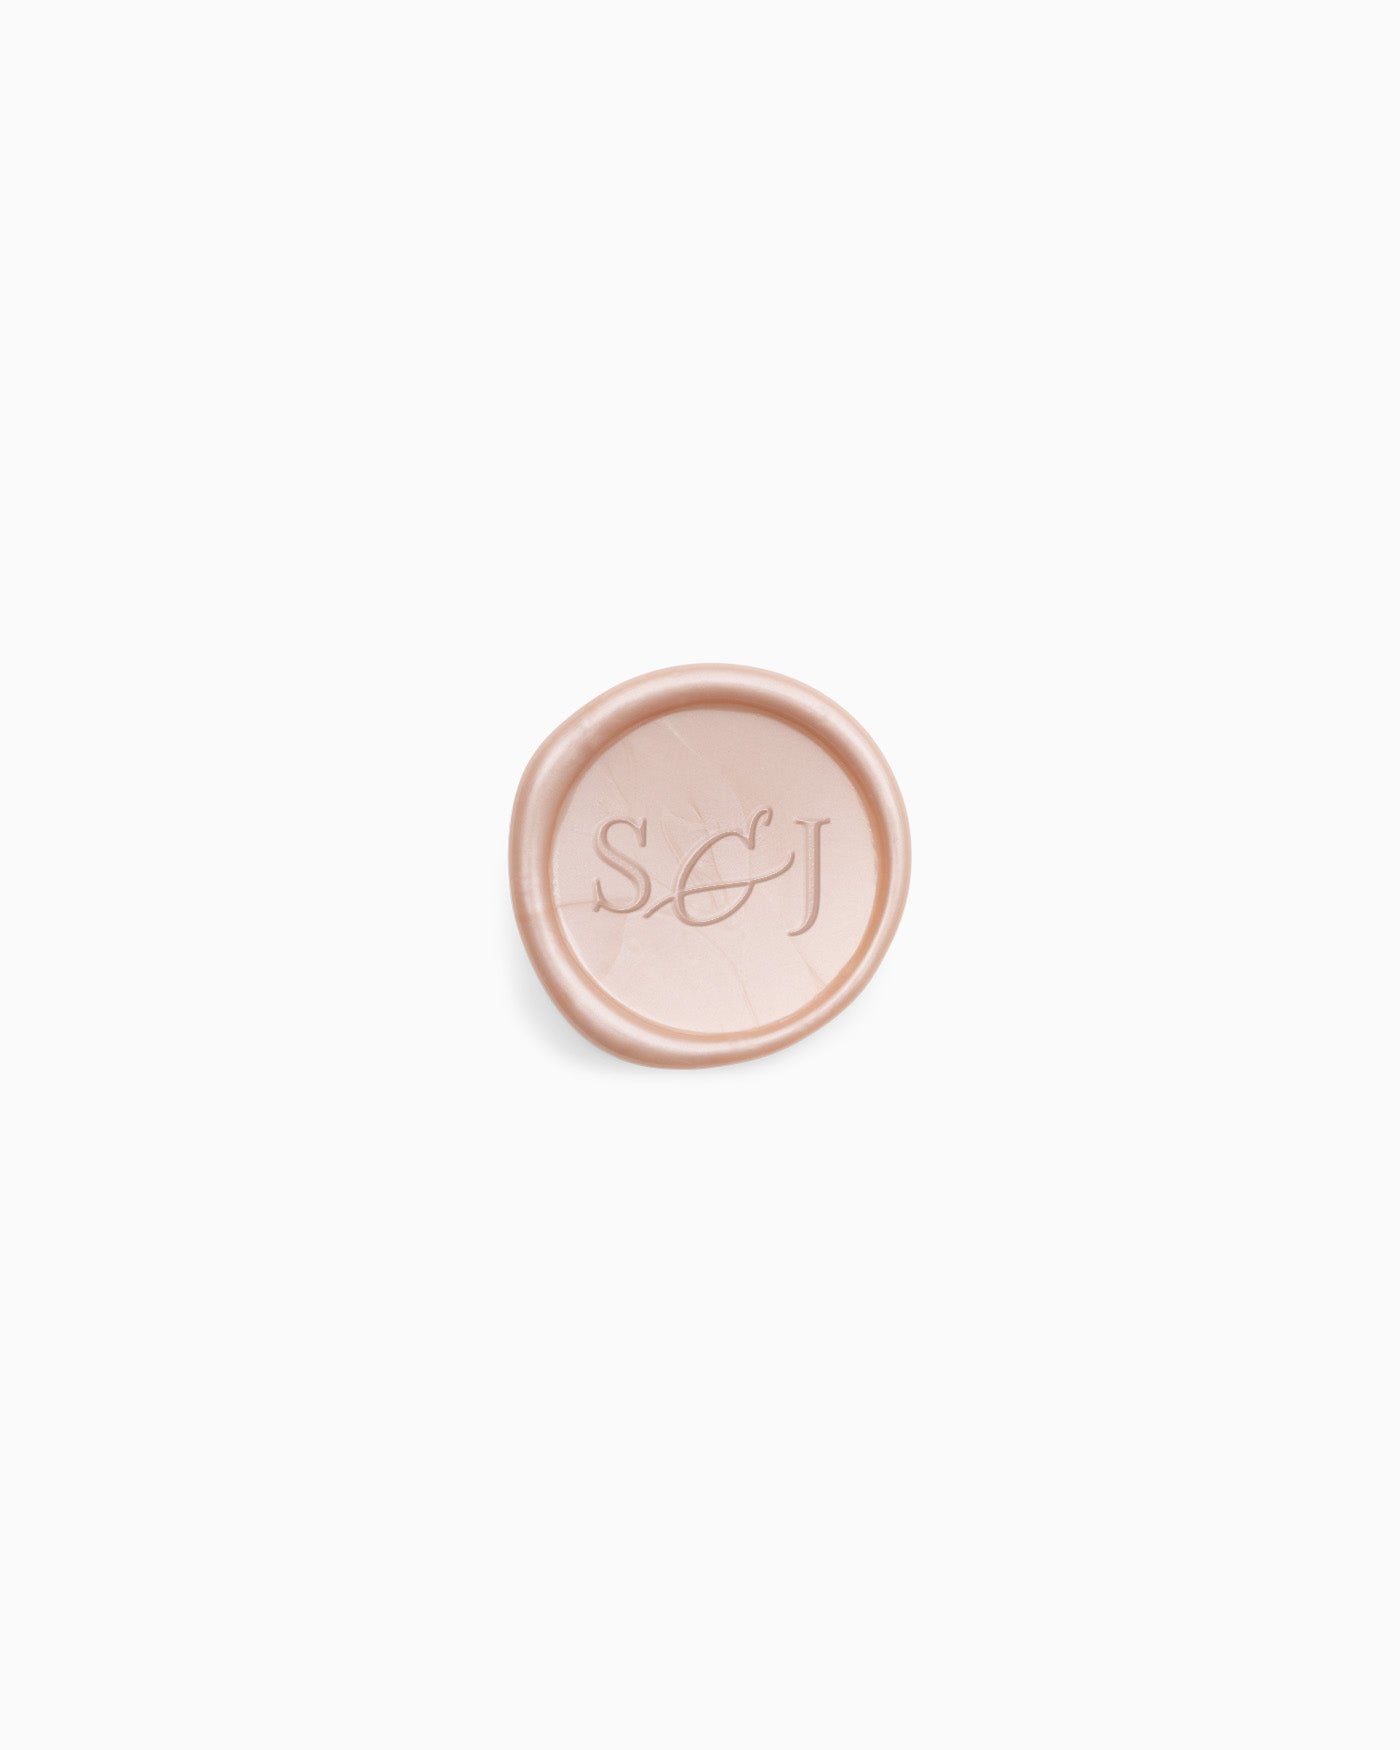 Peppermint Press Stationery Suite Soleil Wax Seal